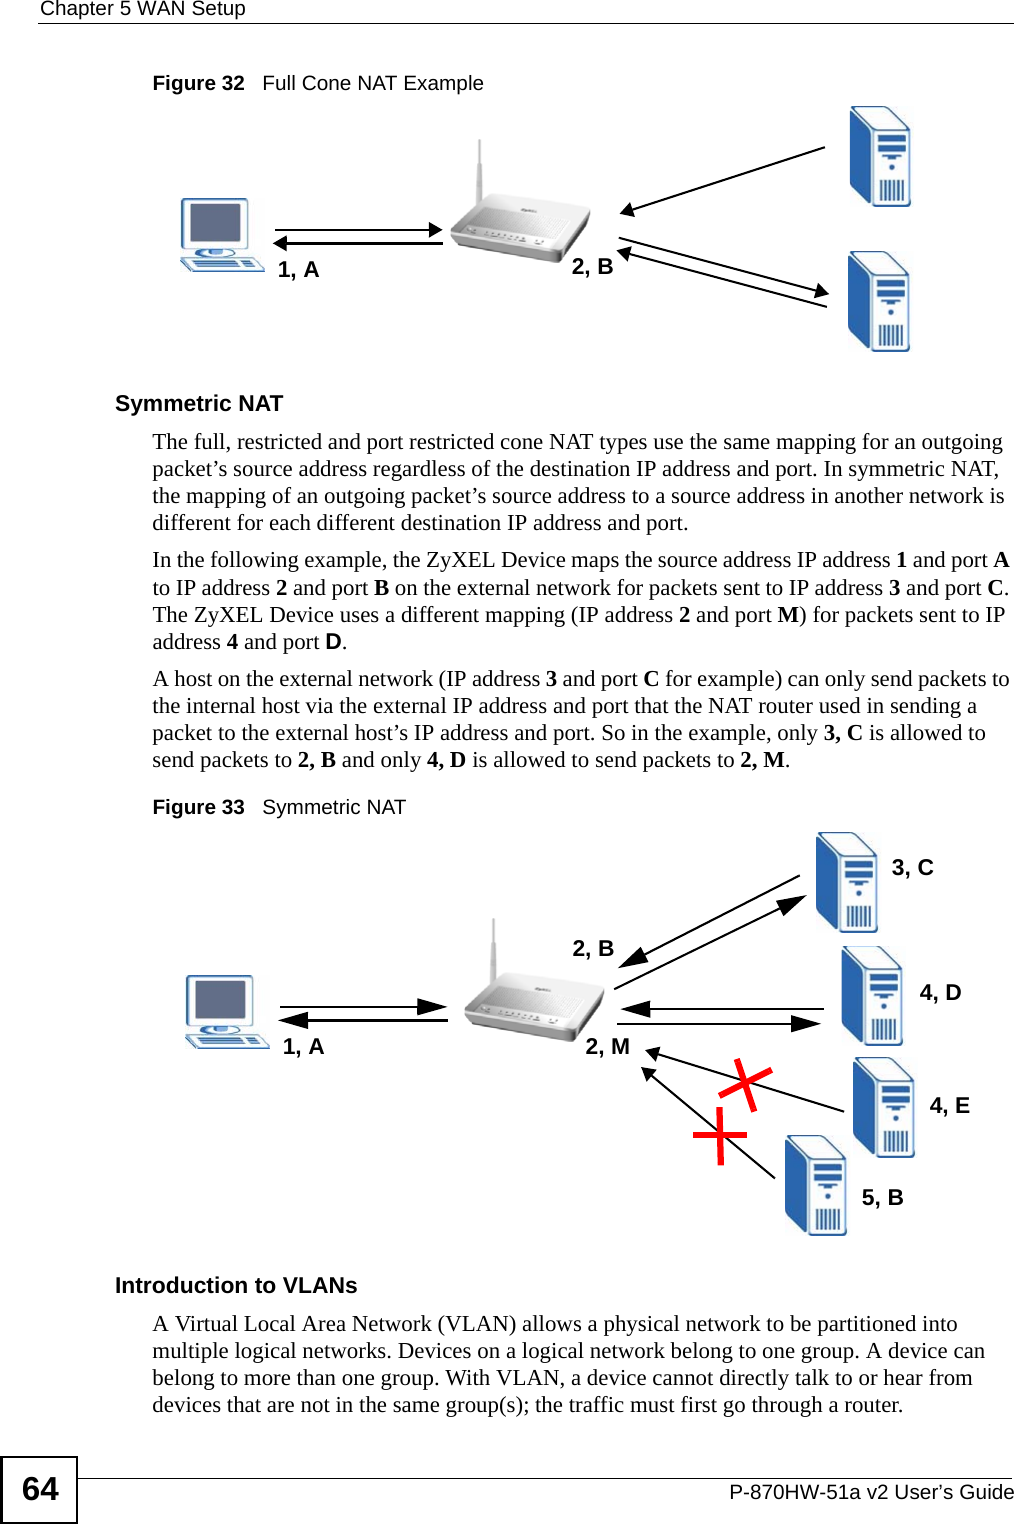 Chapter 5 WAN SetupP-870HW-51a v2 User’s Guide64Figure 32   Full Cone NAT ExampleSymmetric NATThe full, restricted and port restricted cone NAT types use the same mapping for an outgoing packet’s source address regardless of the destination IP address and port. In symmetric NAT, the mapping of an outgoing packet’s source address to a source address in another network is different for each different destination IP address and port. In the following example, the ZyXEL Device maps the source address IP address 1 and port A to IP address 2 and port B on the external network for packets sent to IP address 3 and port C. The ZyXEL Device uses a different mapping (IP address 2 and port M) for packets sent to IP address 4 and port D. A host on the external network (IP address 3 and port C for example) can only send packets to the internal host via the external IP address and port that the NAT router used in sending a packet to the external host’s IP address and port. So in the example, only 3, C is allowed to send packets to 2, B and only 4, D is allowed to send packets to 2, M.Figure 33   Symmetric NATIntroduction to VLANs A Virtual Local Area Network (VLAN) allows a physical network to be partitioned into multiple logical networks. Devices on a logical network belong to one group. A device can belong to more than one group. With VLAN, a device cannot directly talk to or hear from devices that are not in the same group(s); the traffic must first go through a router.2, B1, A1, A 2, M2, B4, D4, E3, C5, B